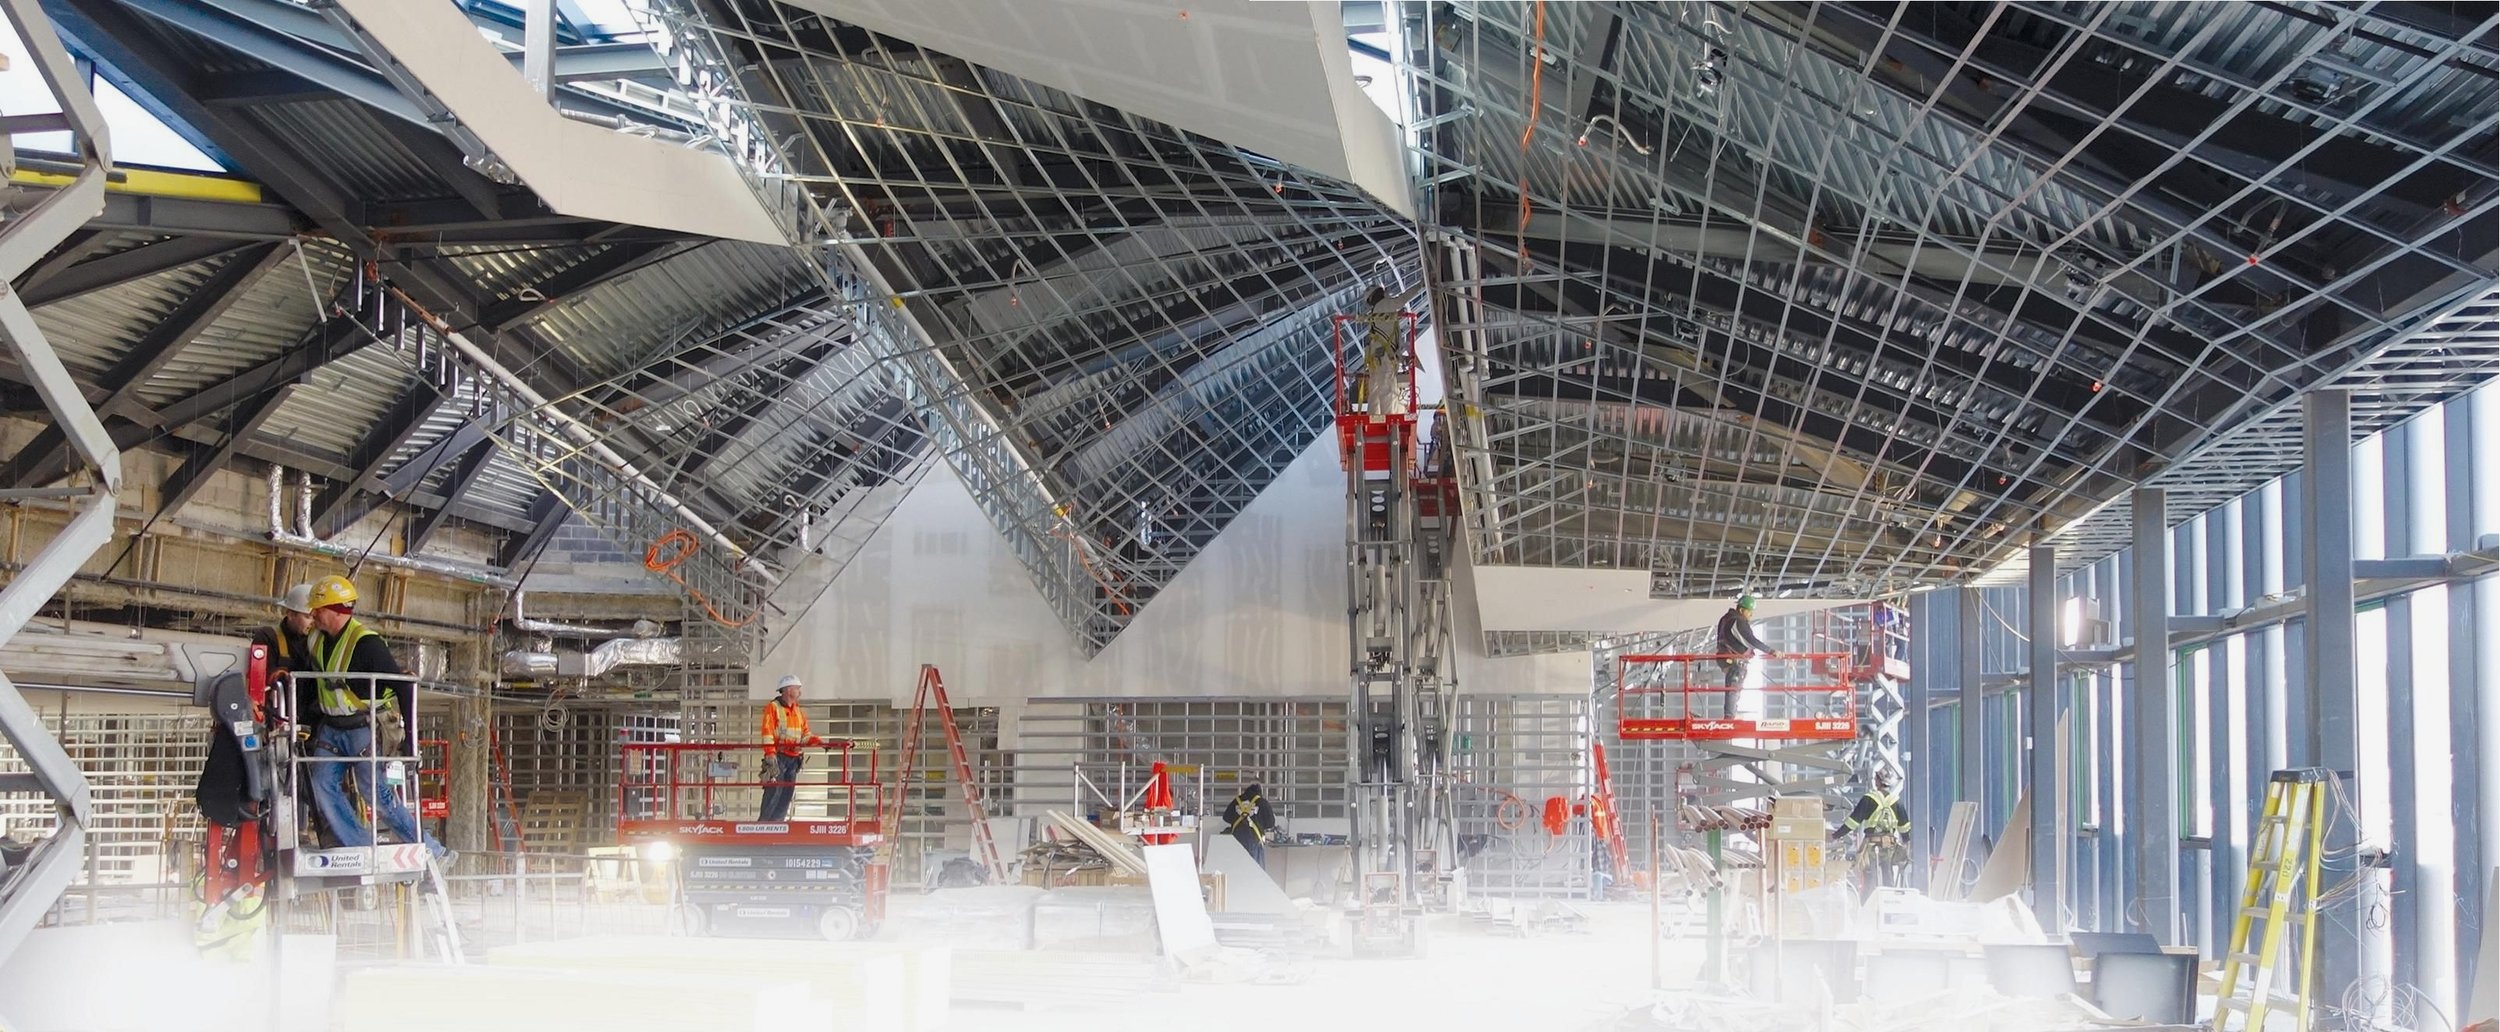   Nelmar Drywall earns recognition for innovative project    read more  